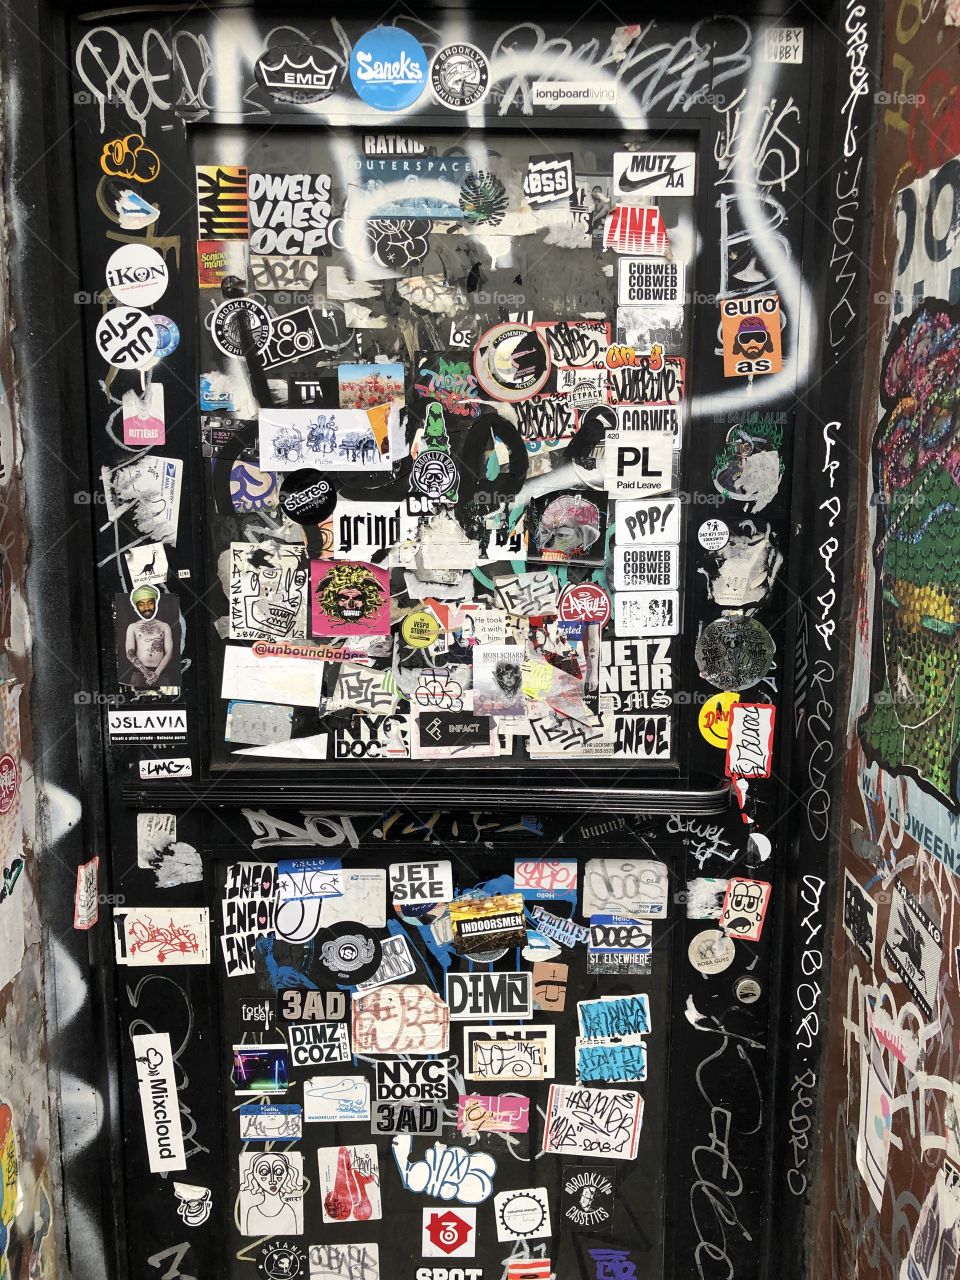 Sticker bomb on a New York door, classic New York Graffiti. Awesome fine that will keep evolving as people keep adding and removing their little pieces of art. 